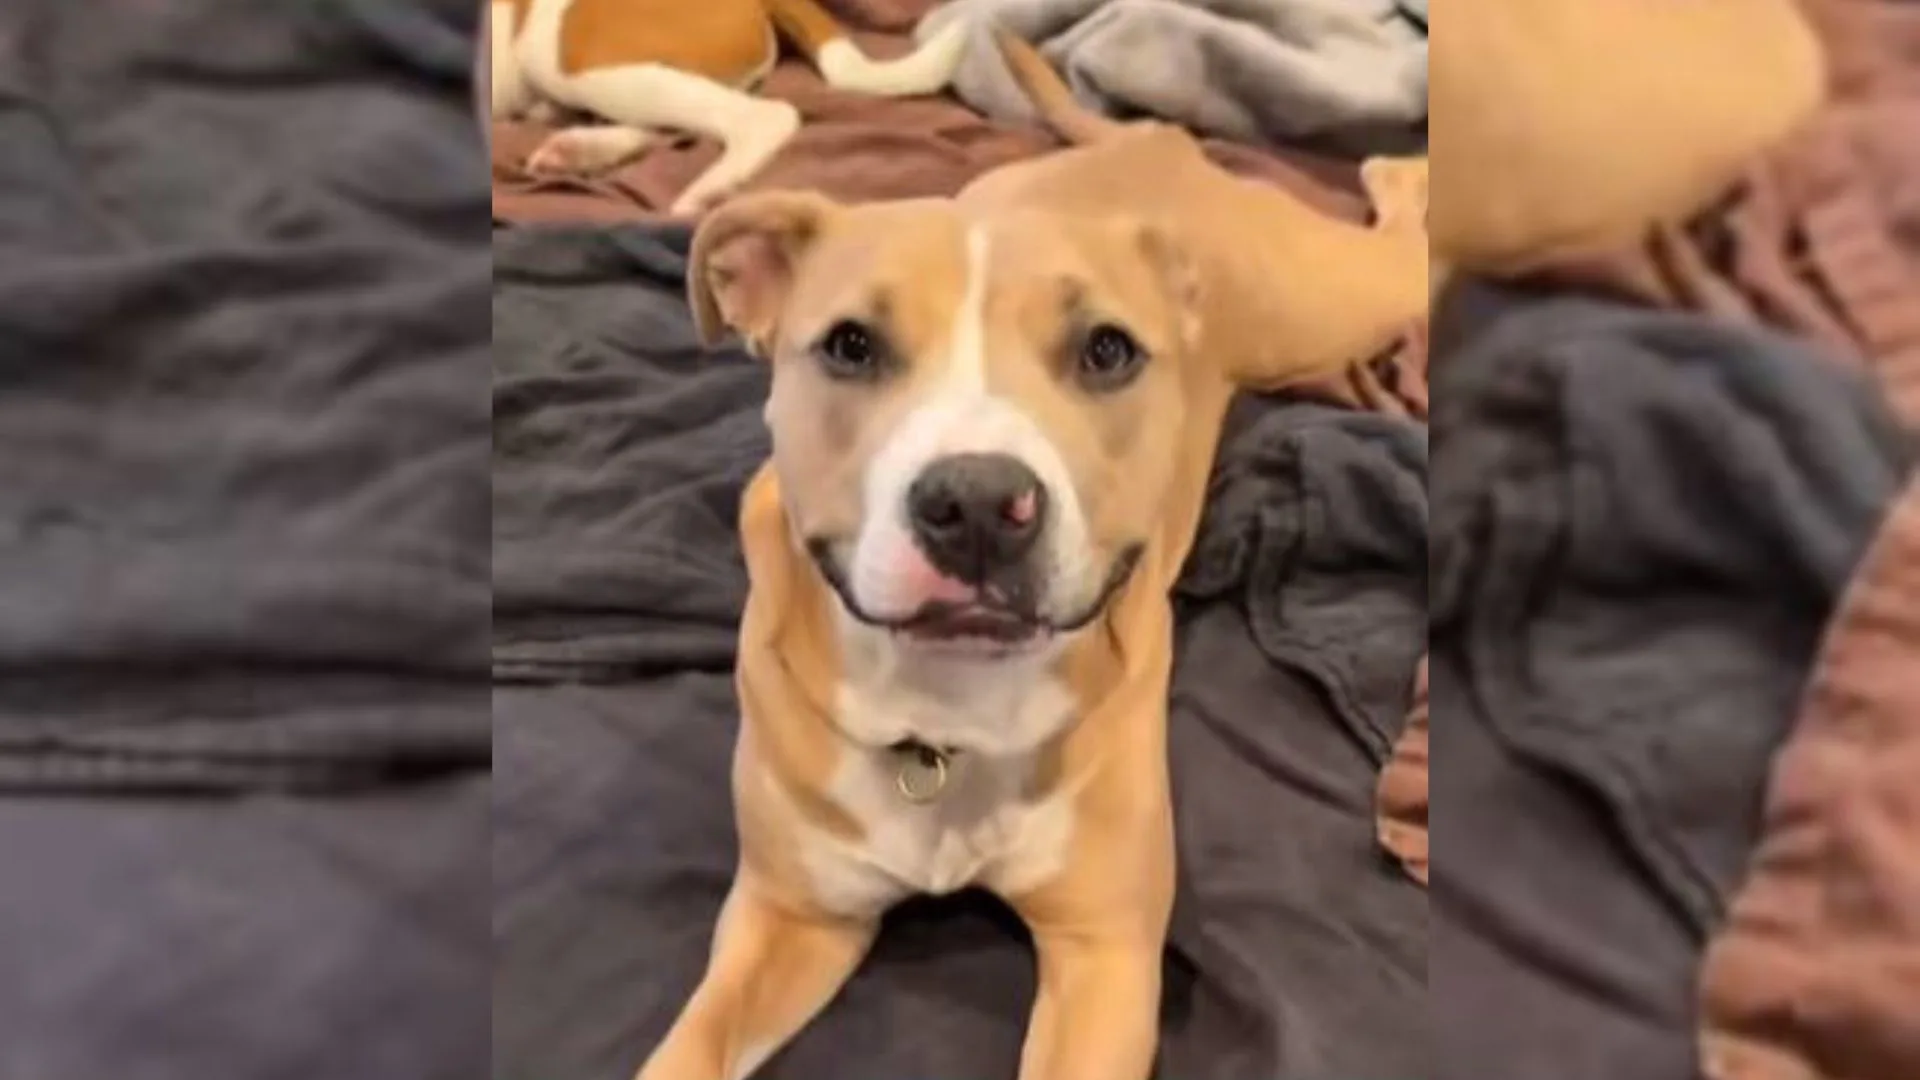 Rescue Pittie Smiles Again In A New Home After Her Heartbreaking Past